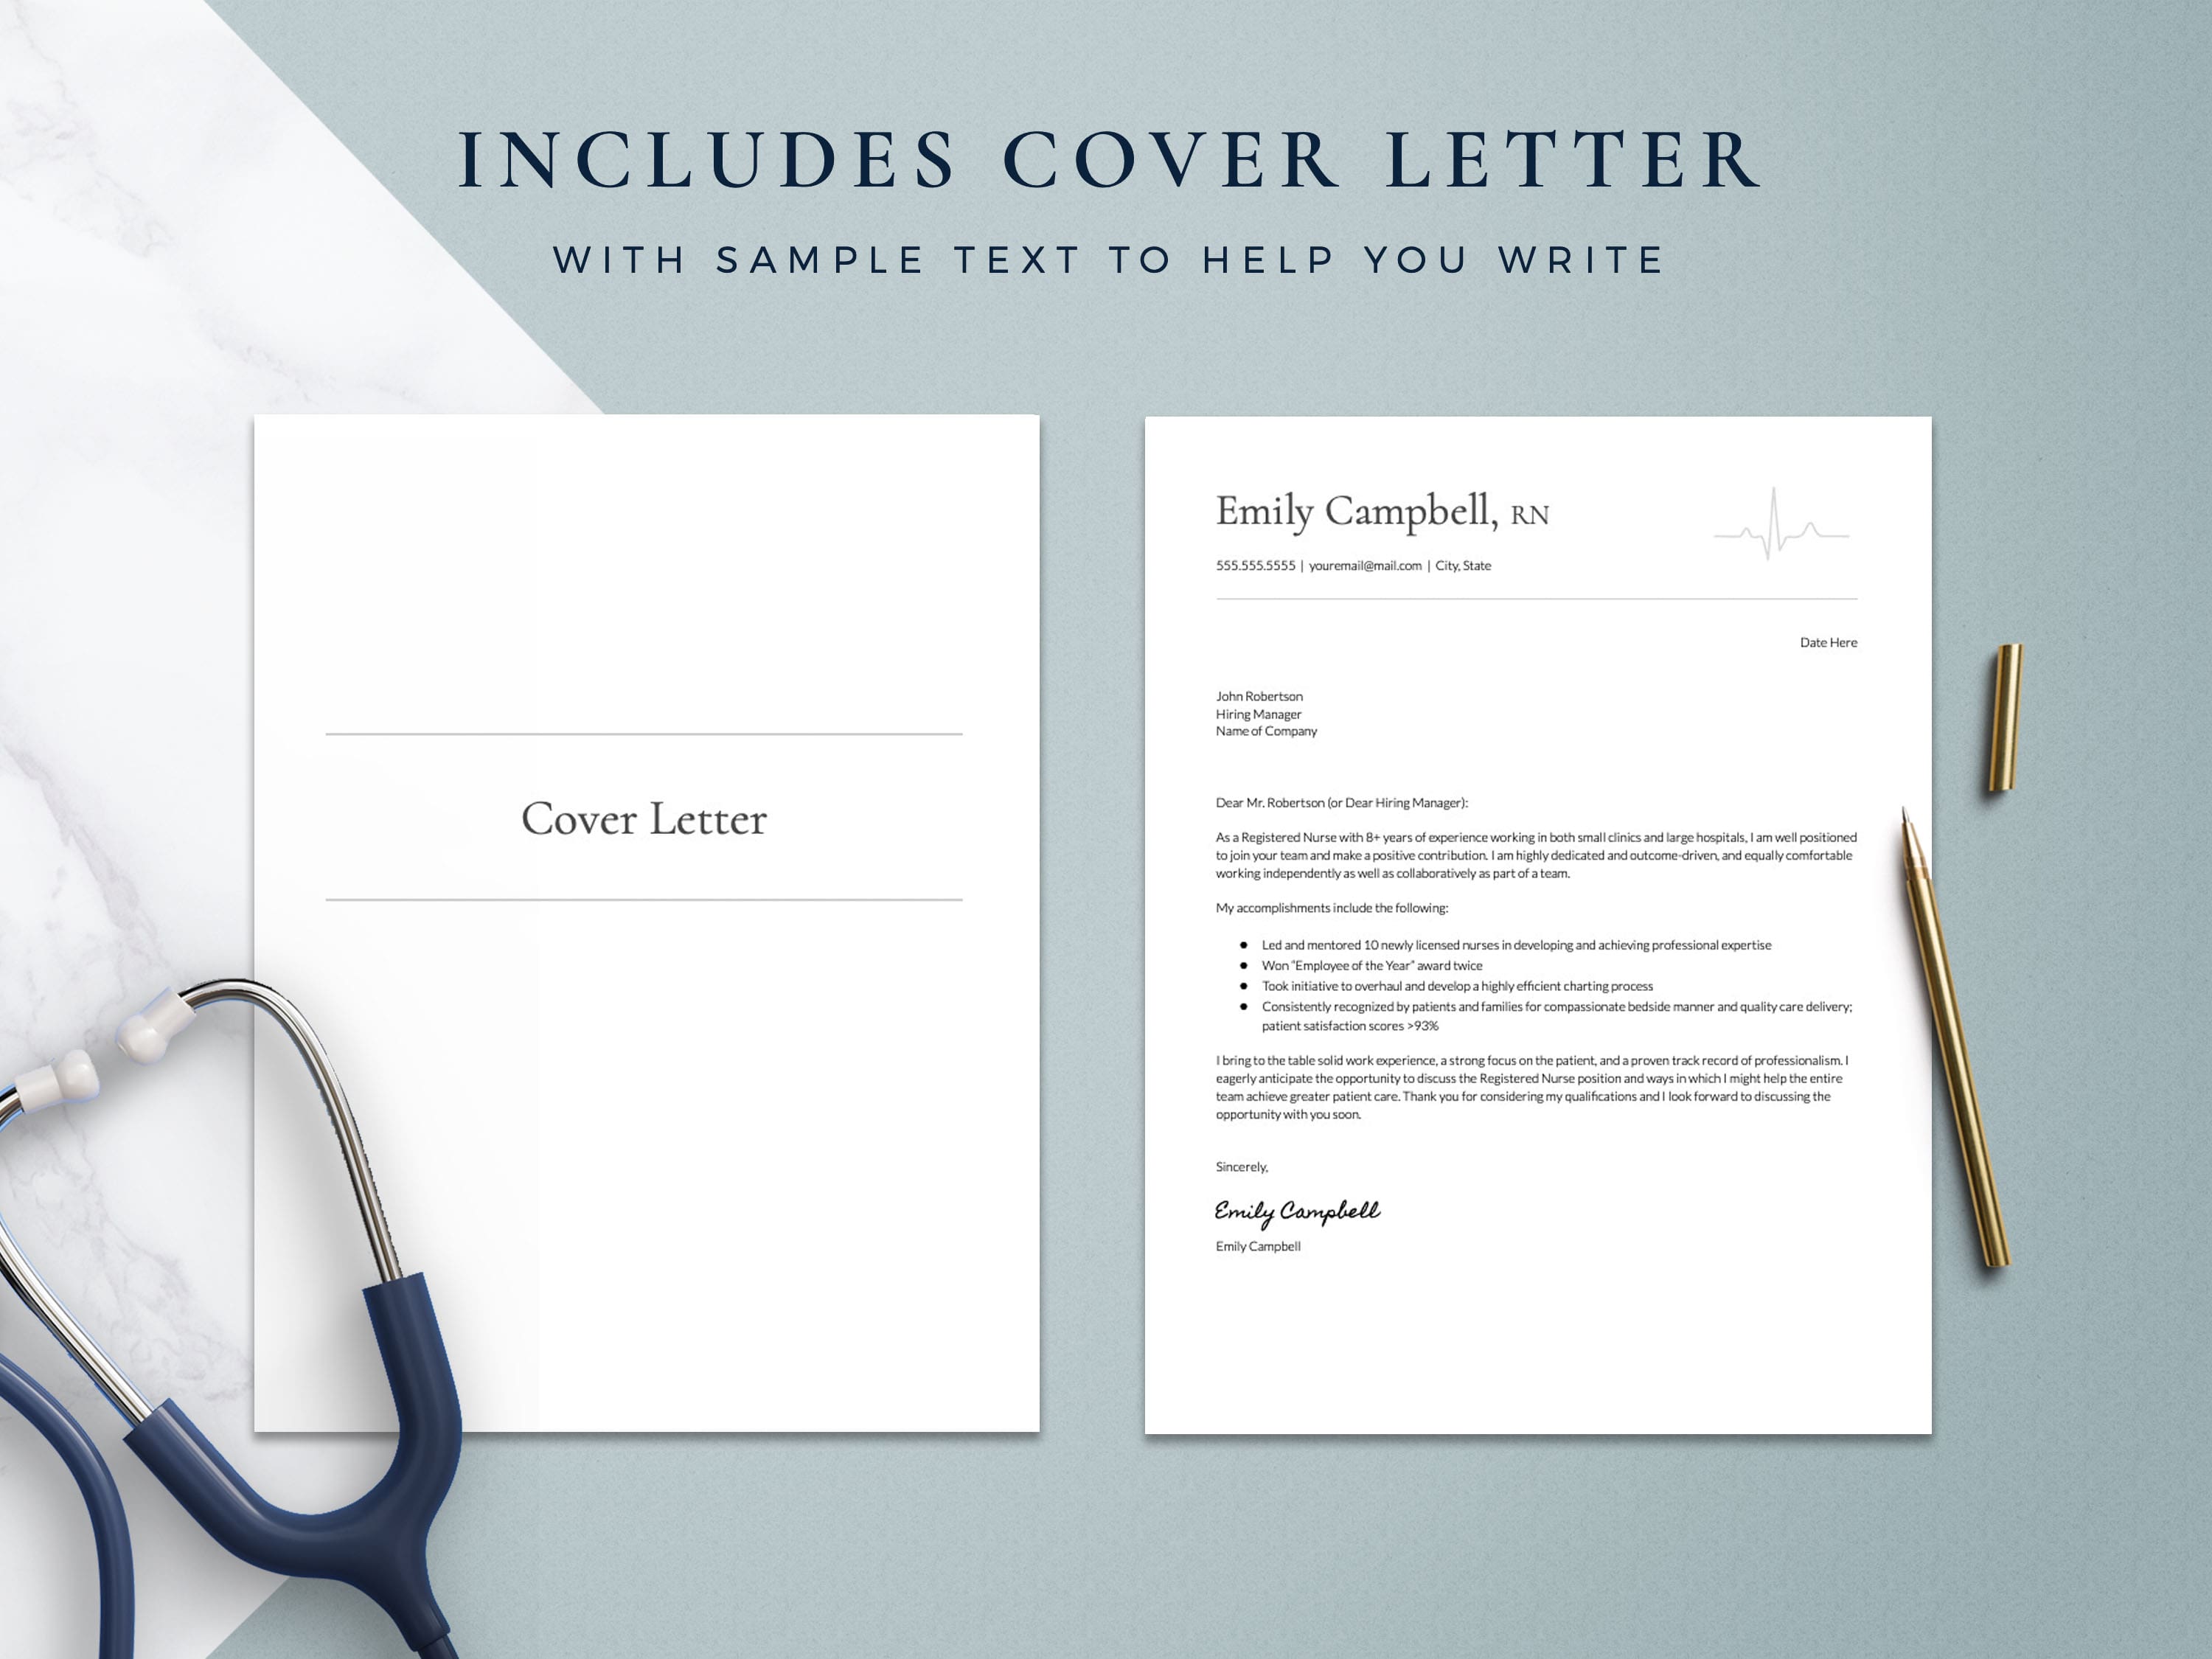 Nursing resume and cover letter template